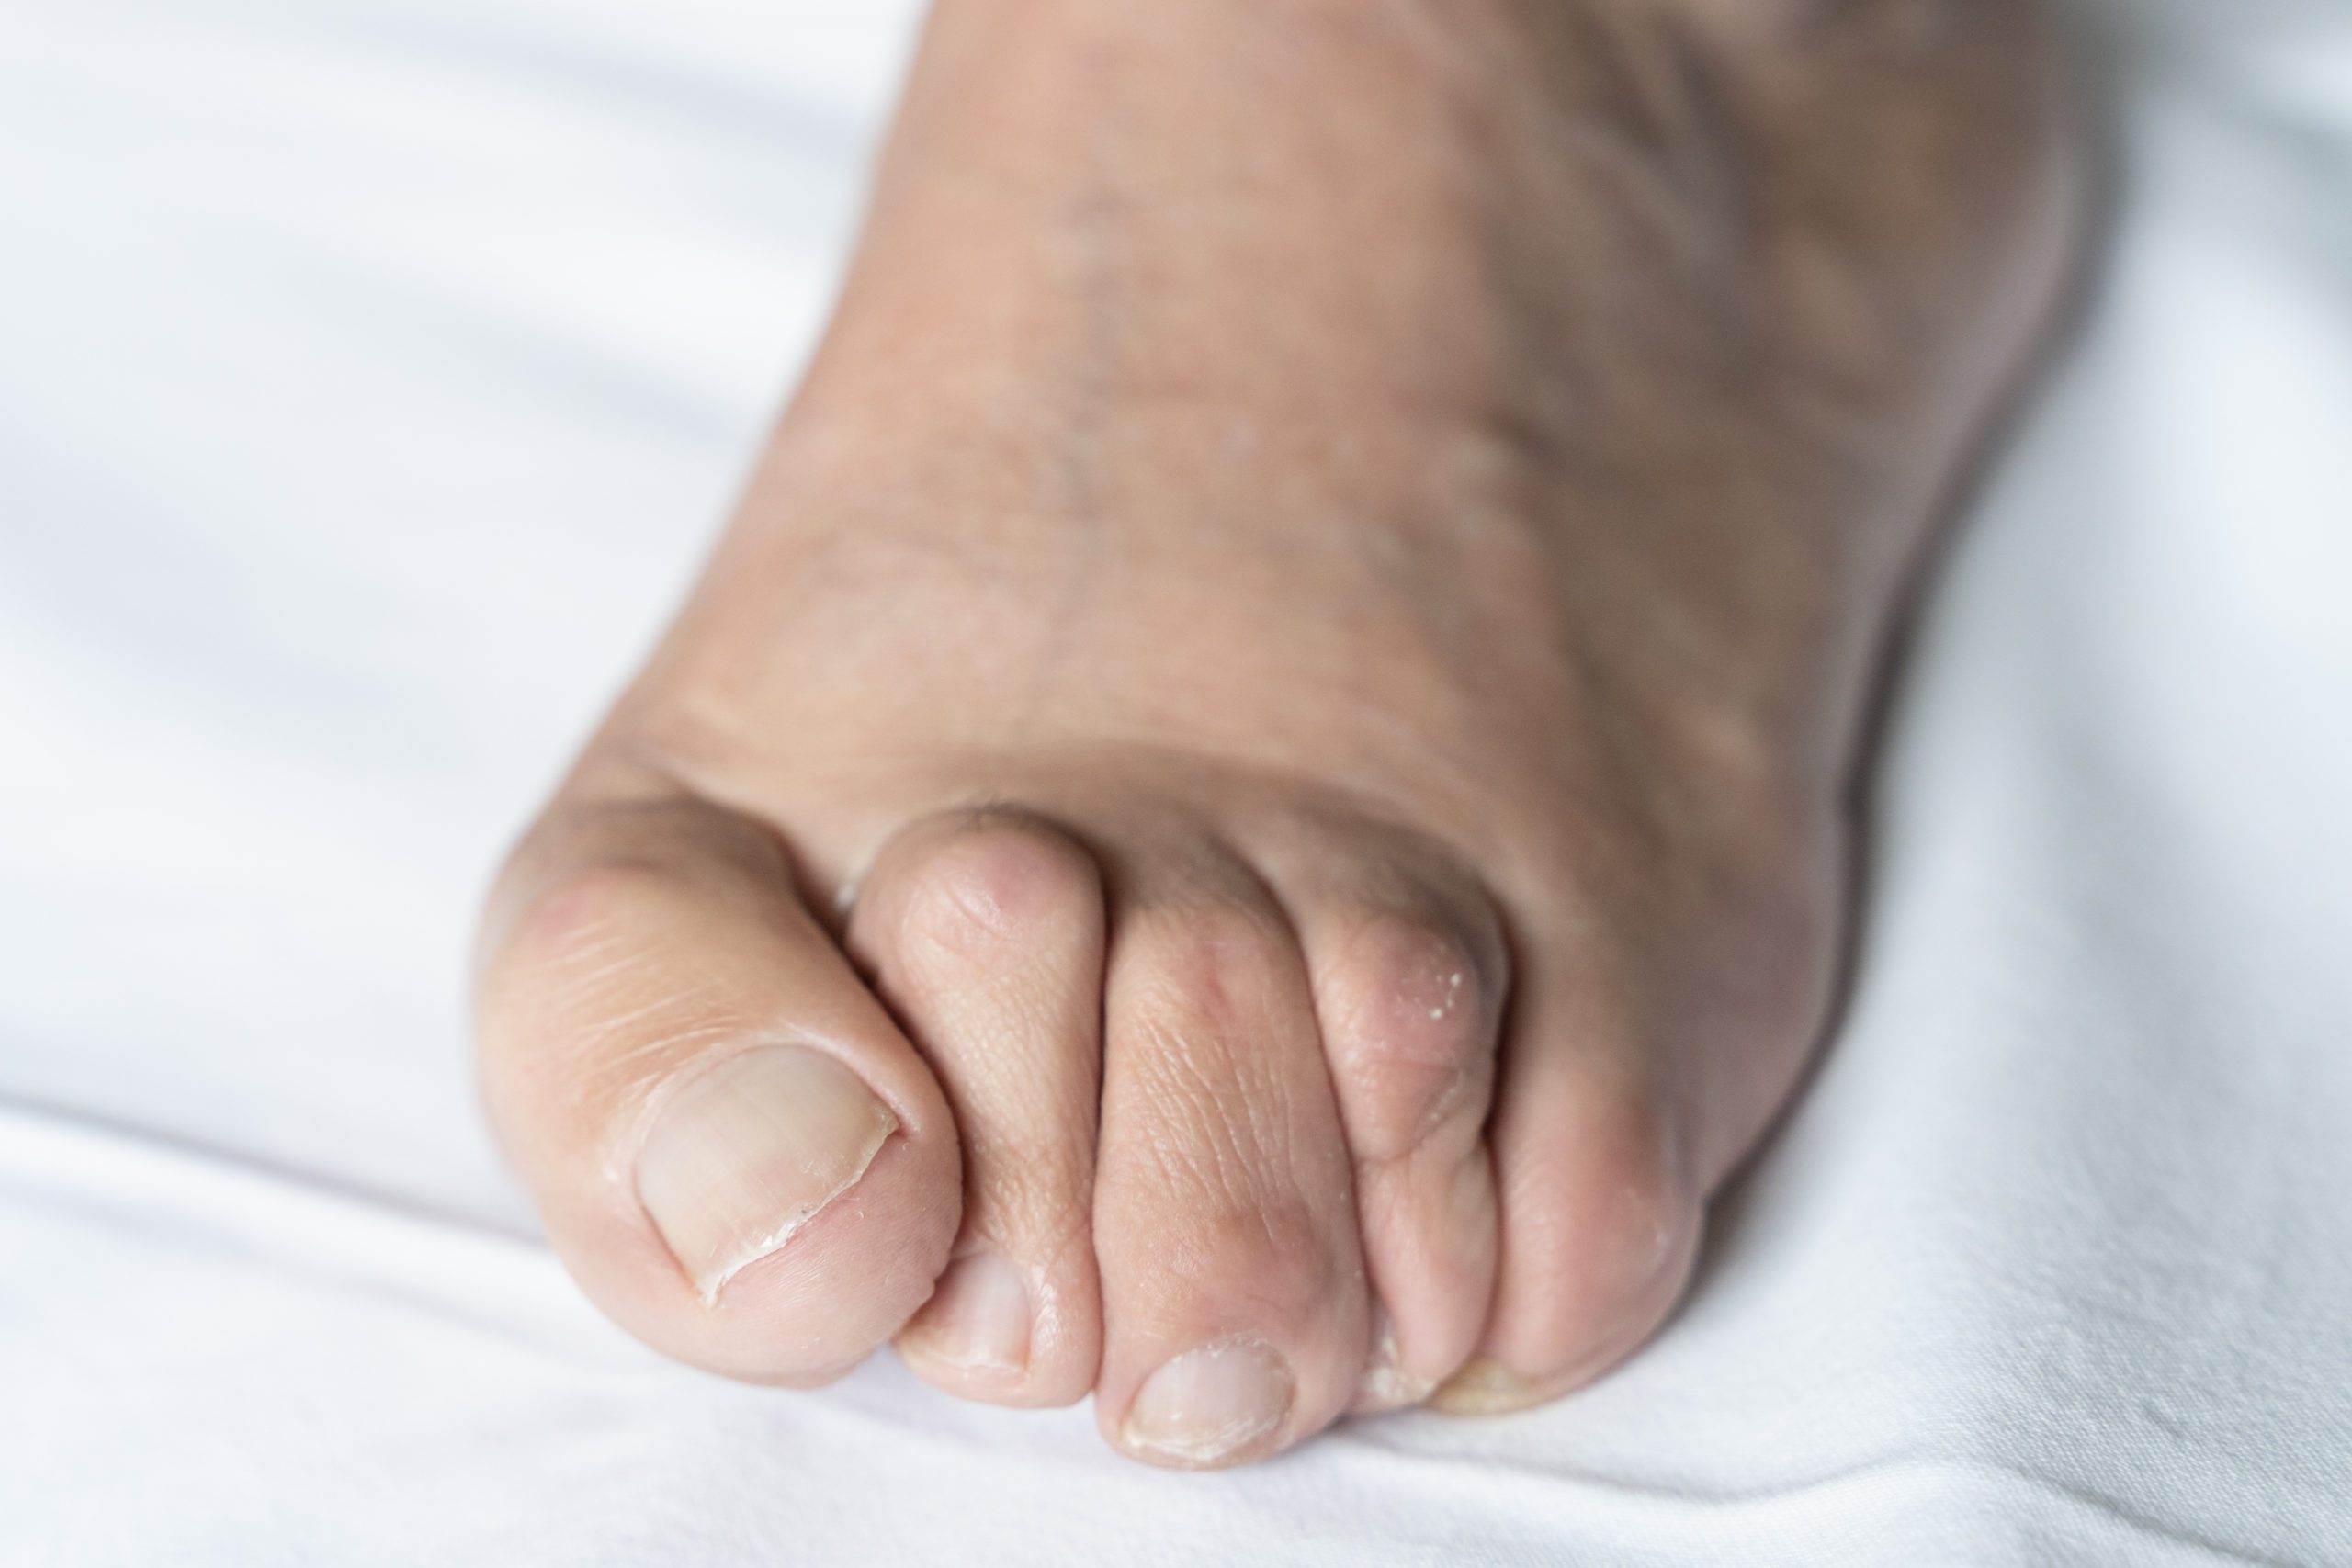 Close-up image of a foot with hammer toes, showing bent and misshapen toes.